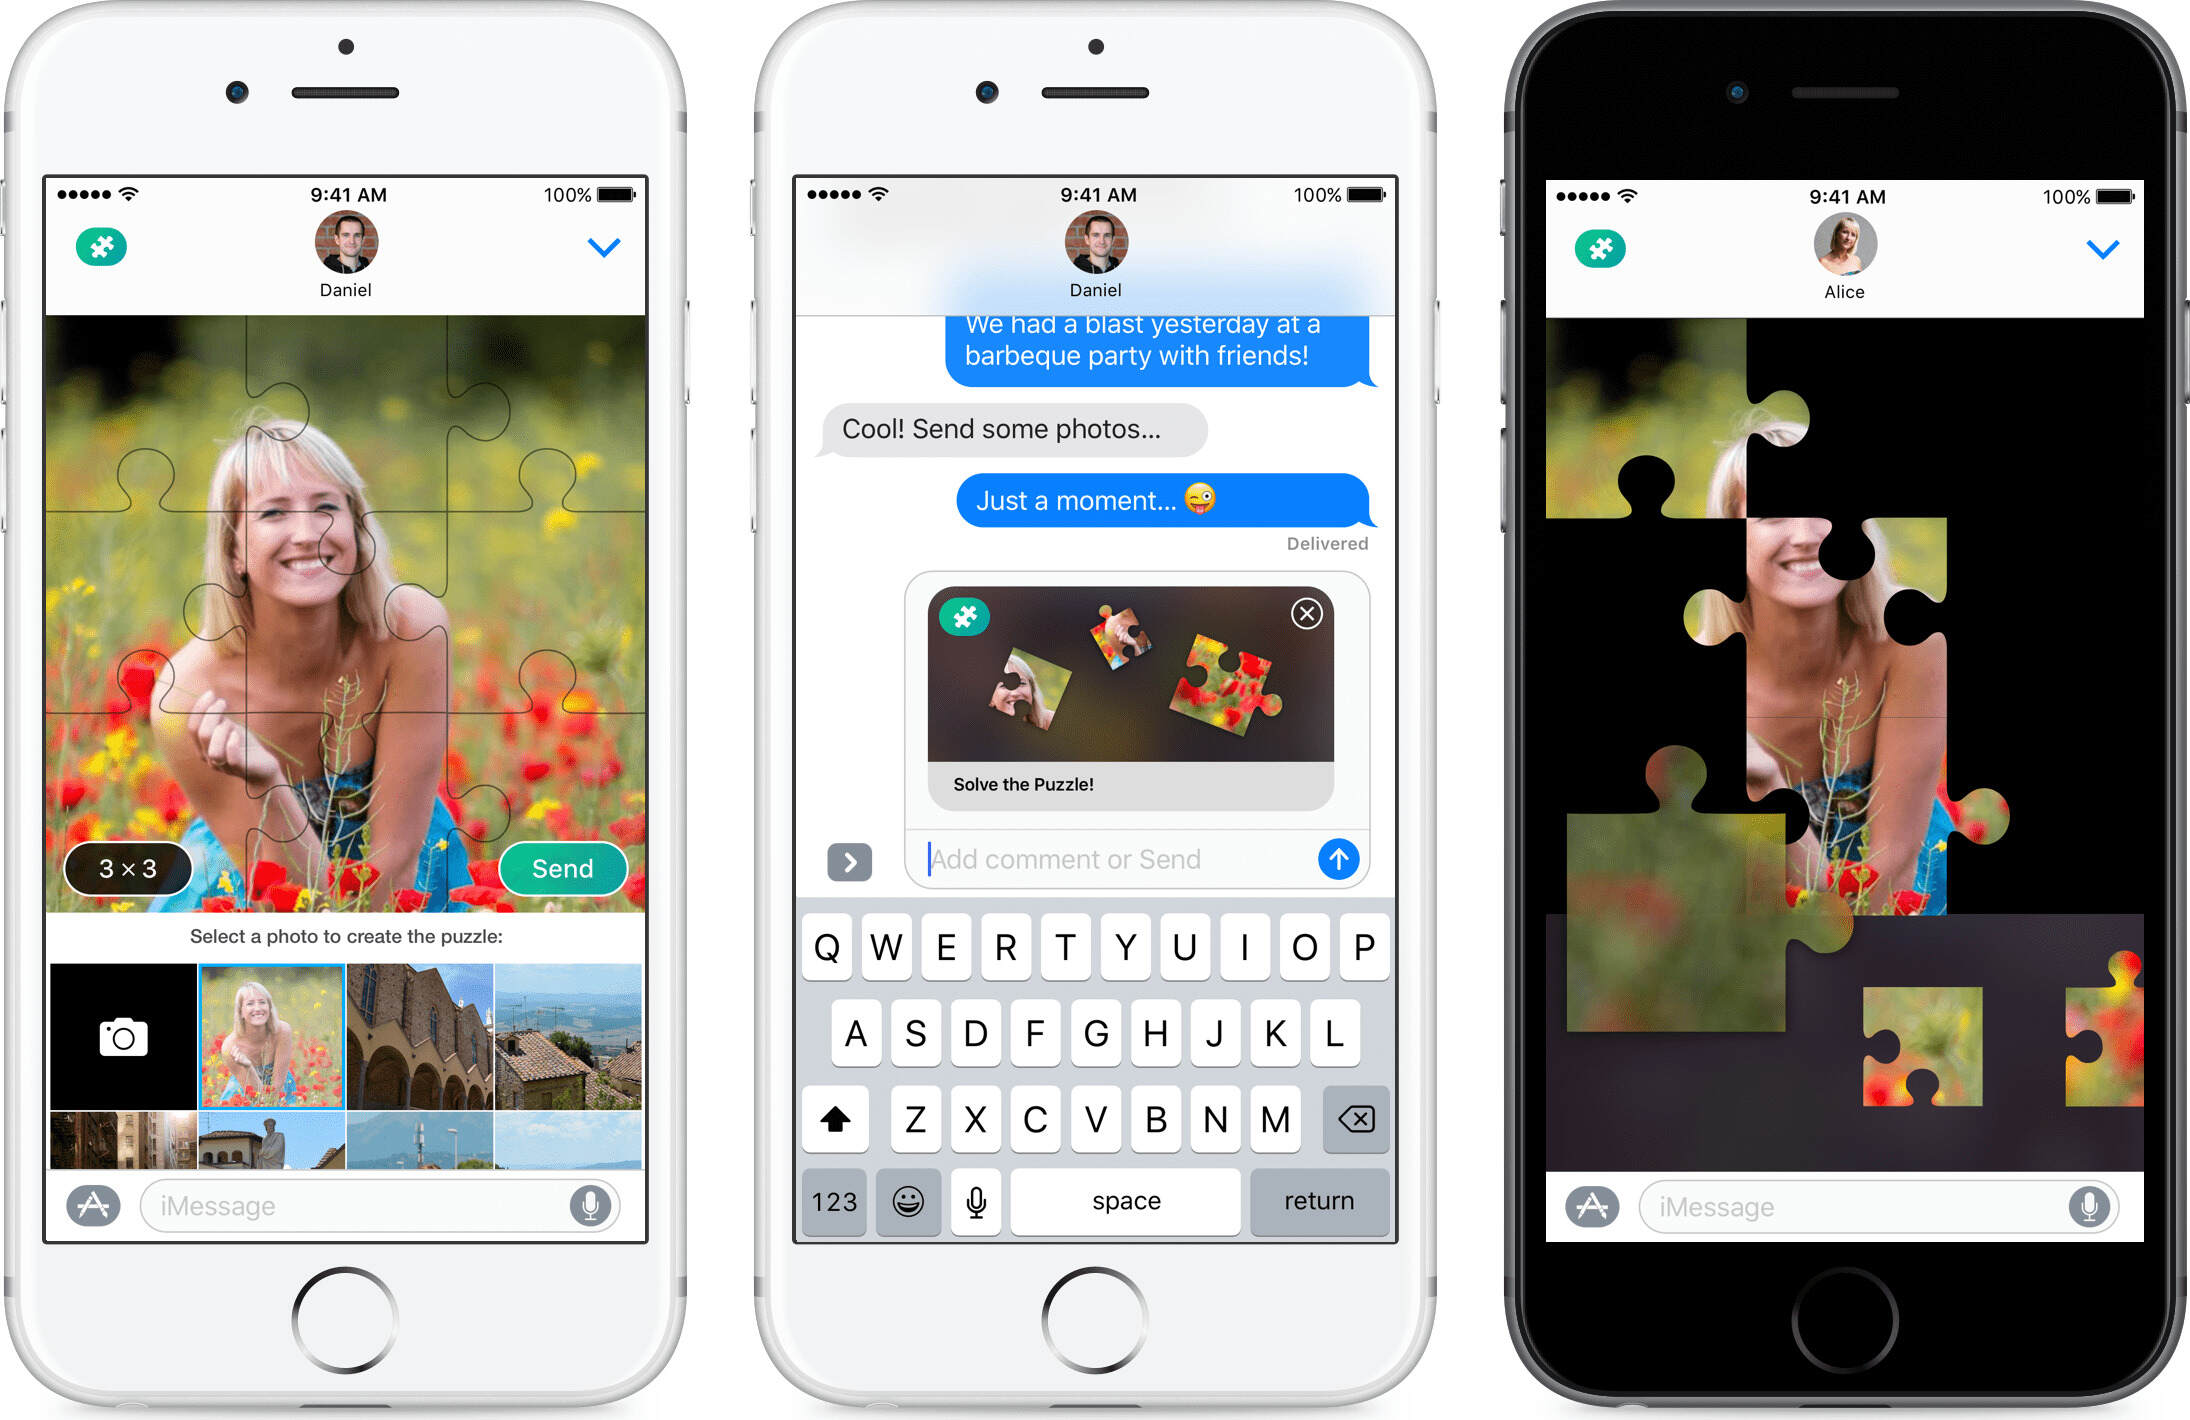 How To Send Puzzle Pictures On IMessage